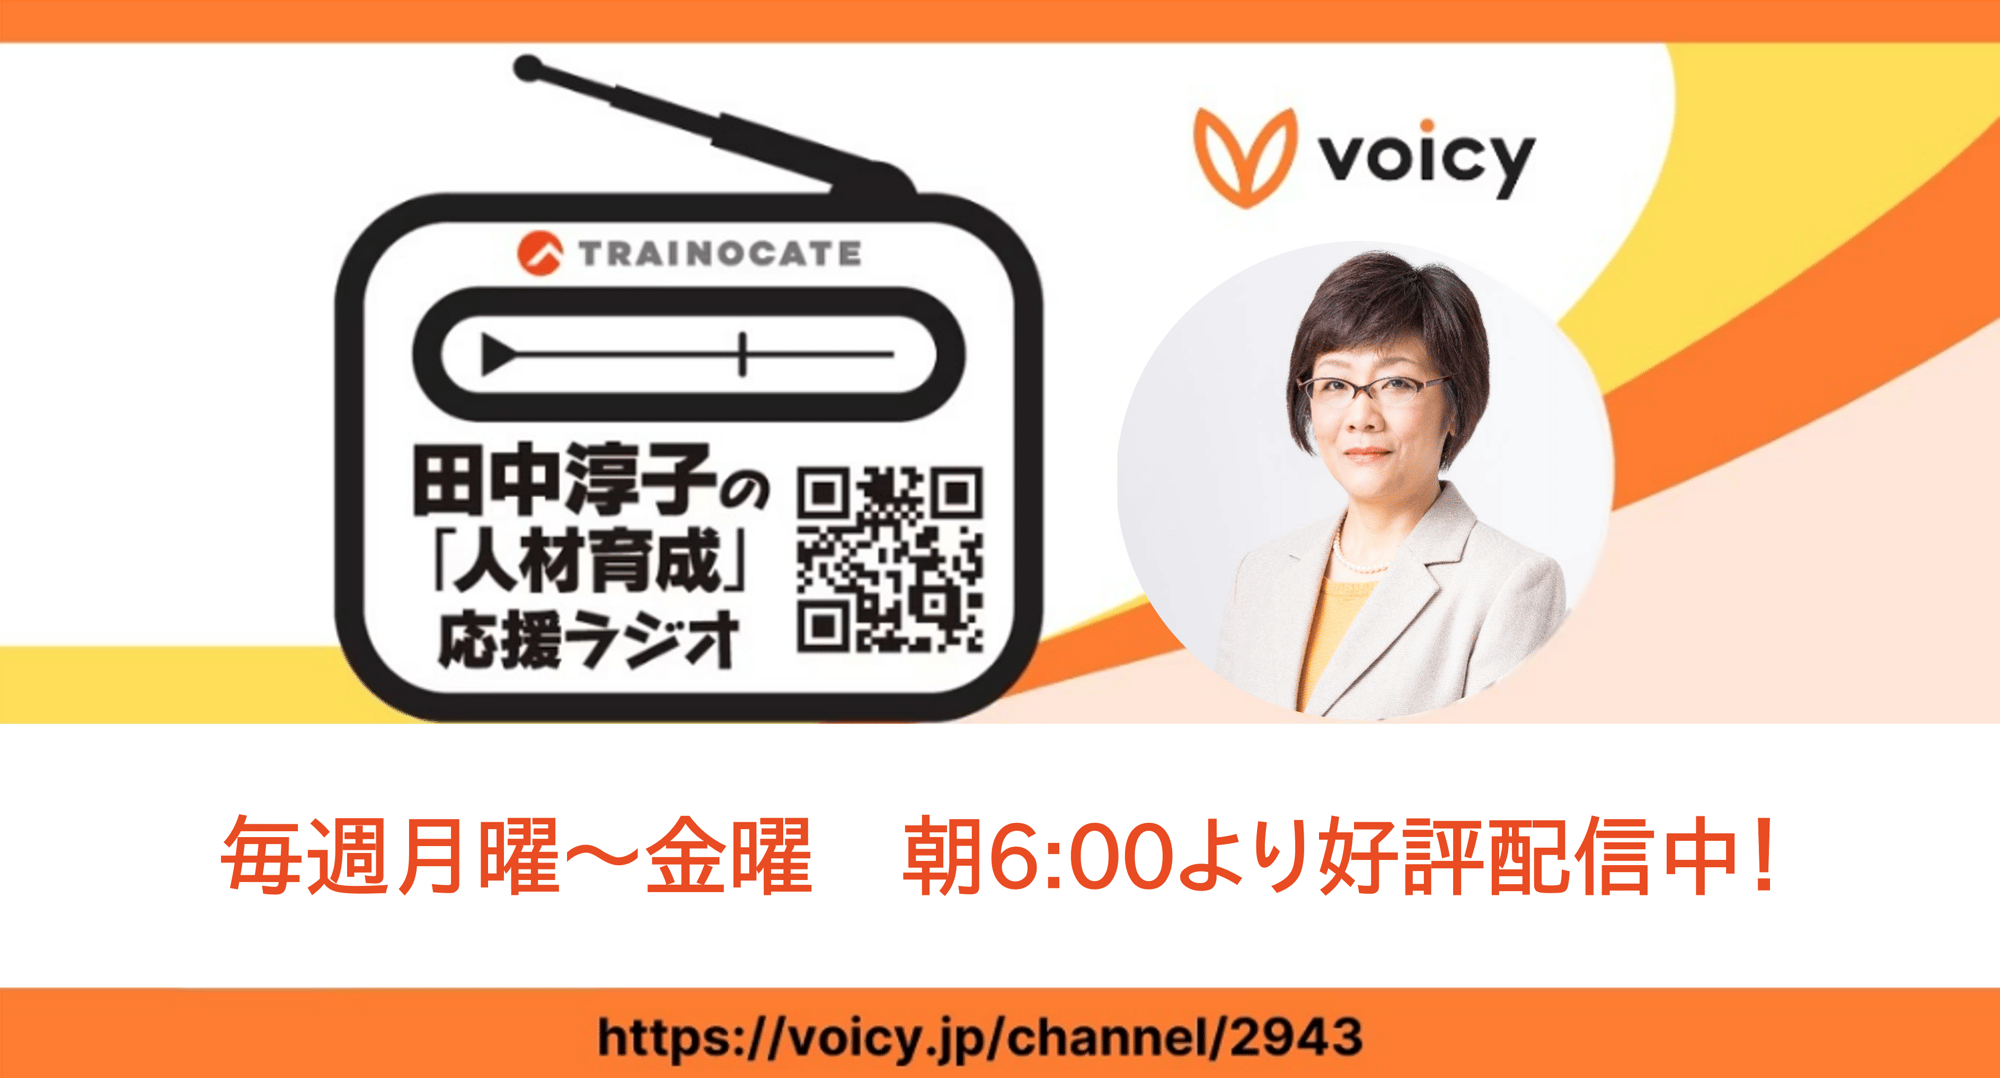 Voicy-ブログ用6時スタート-2